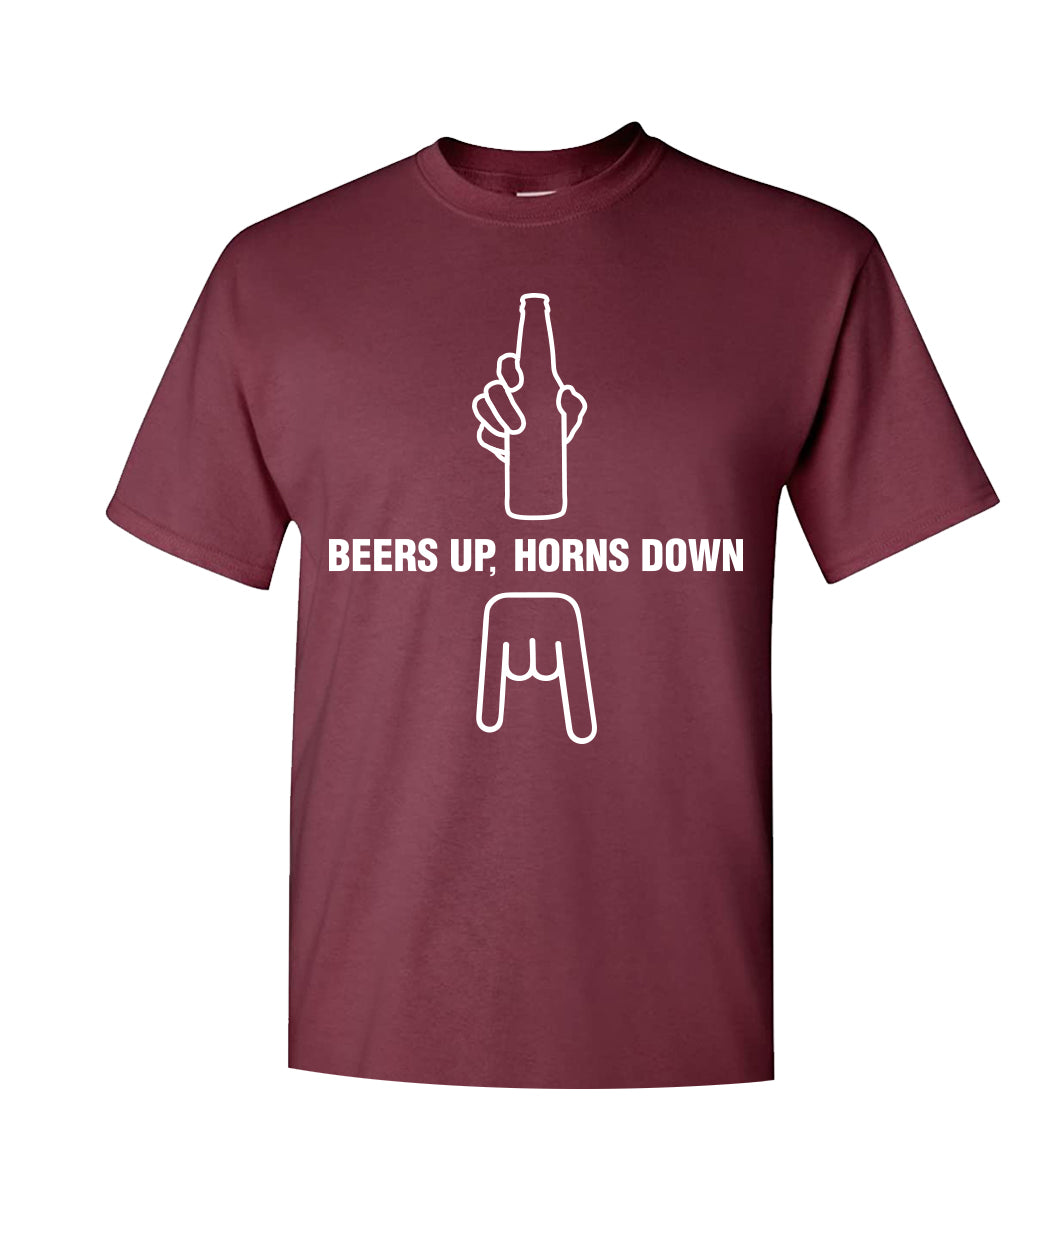 Beers Up, Horns Down (Texas A&M)